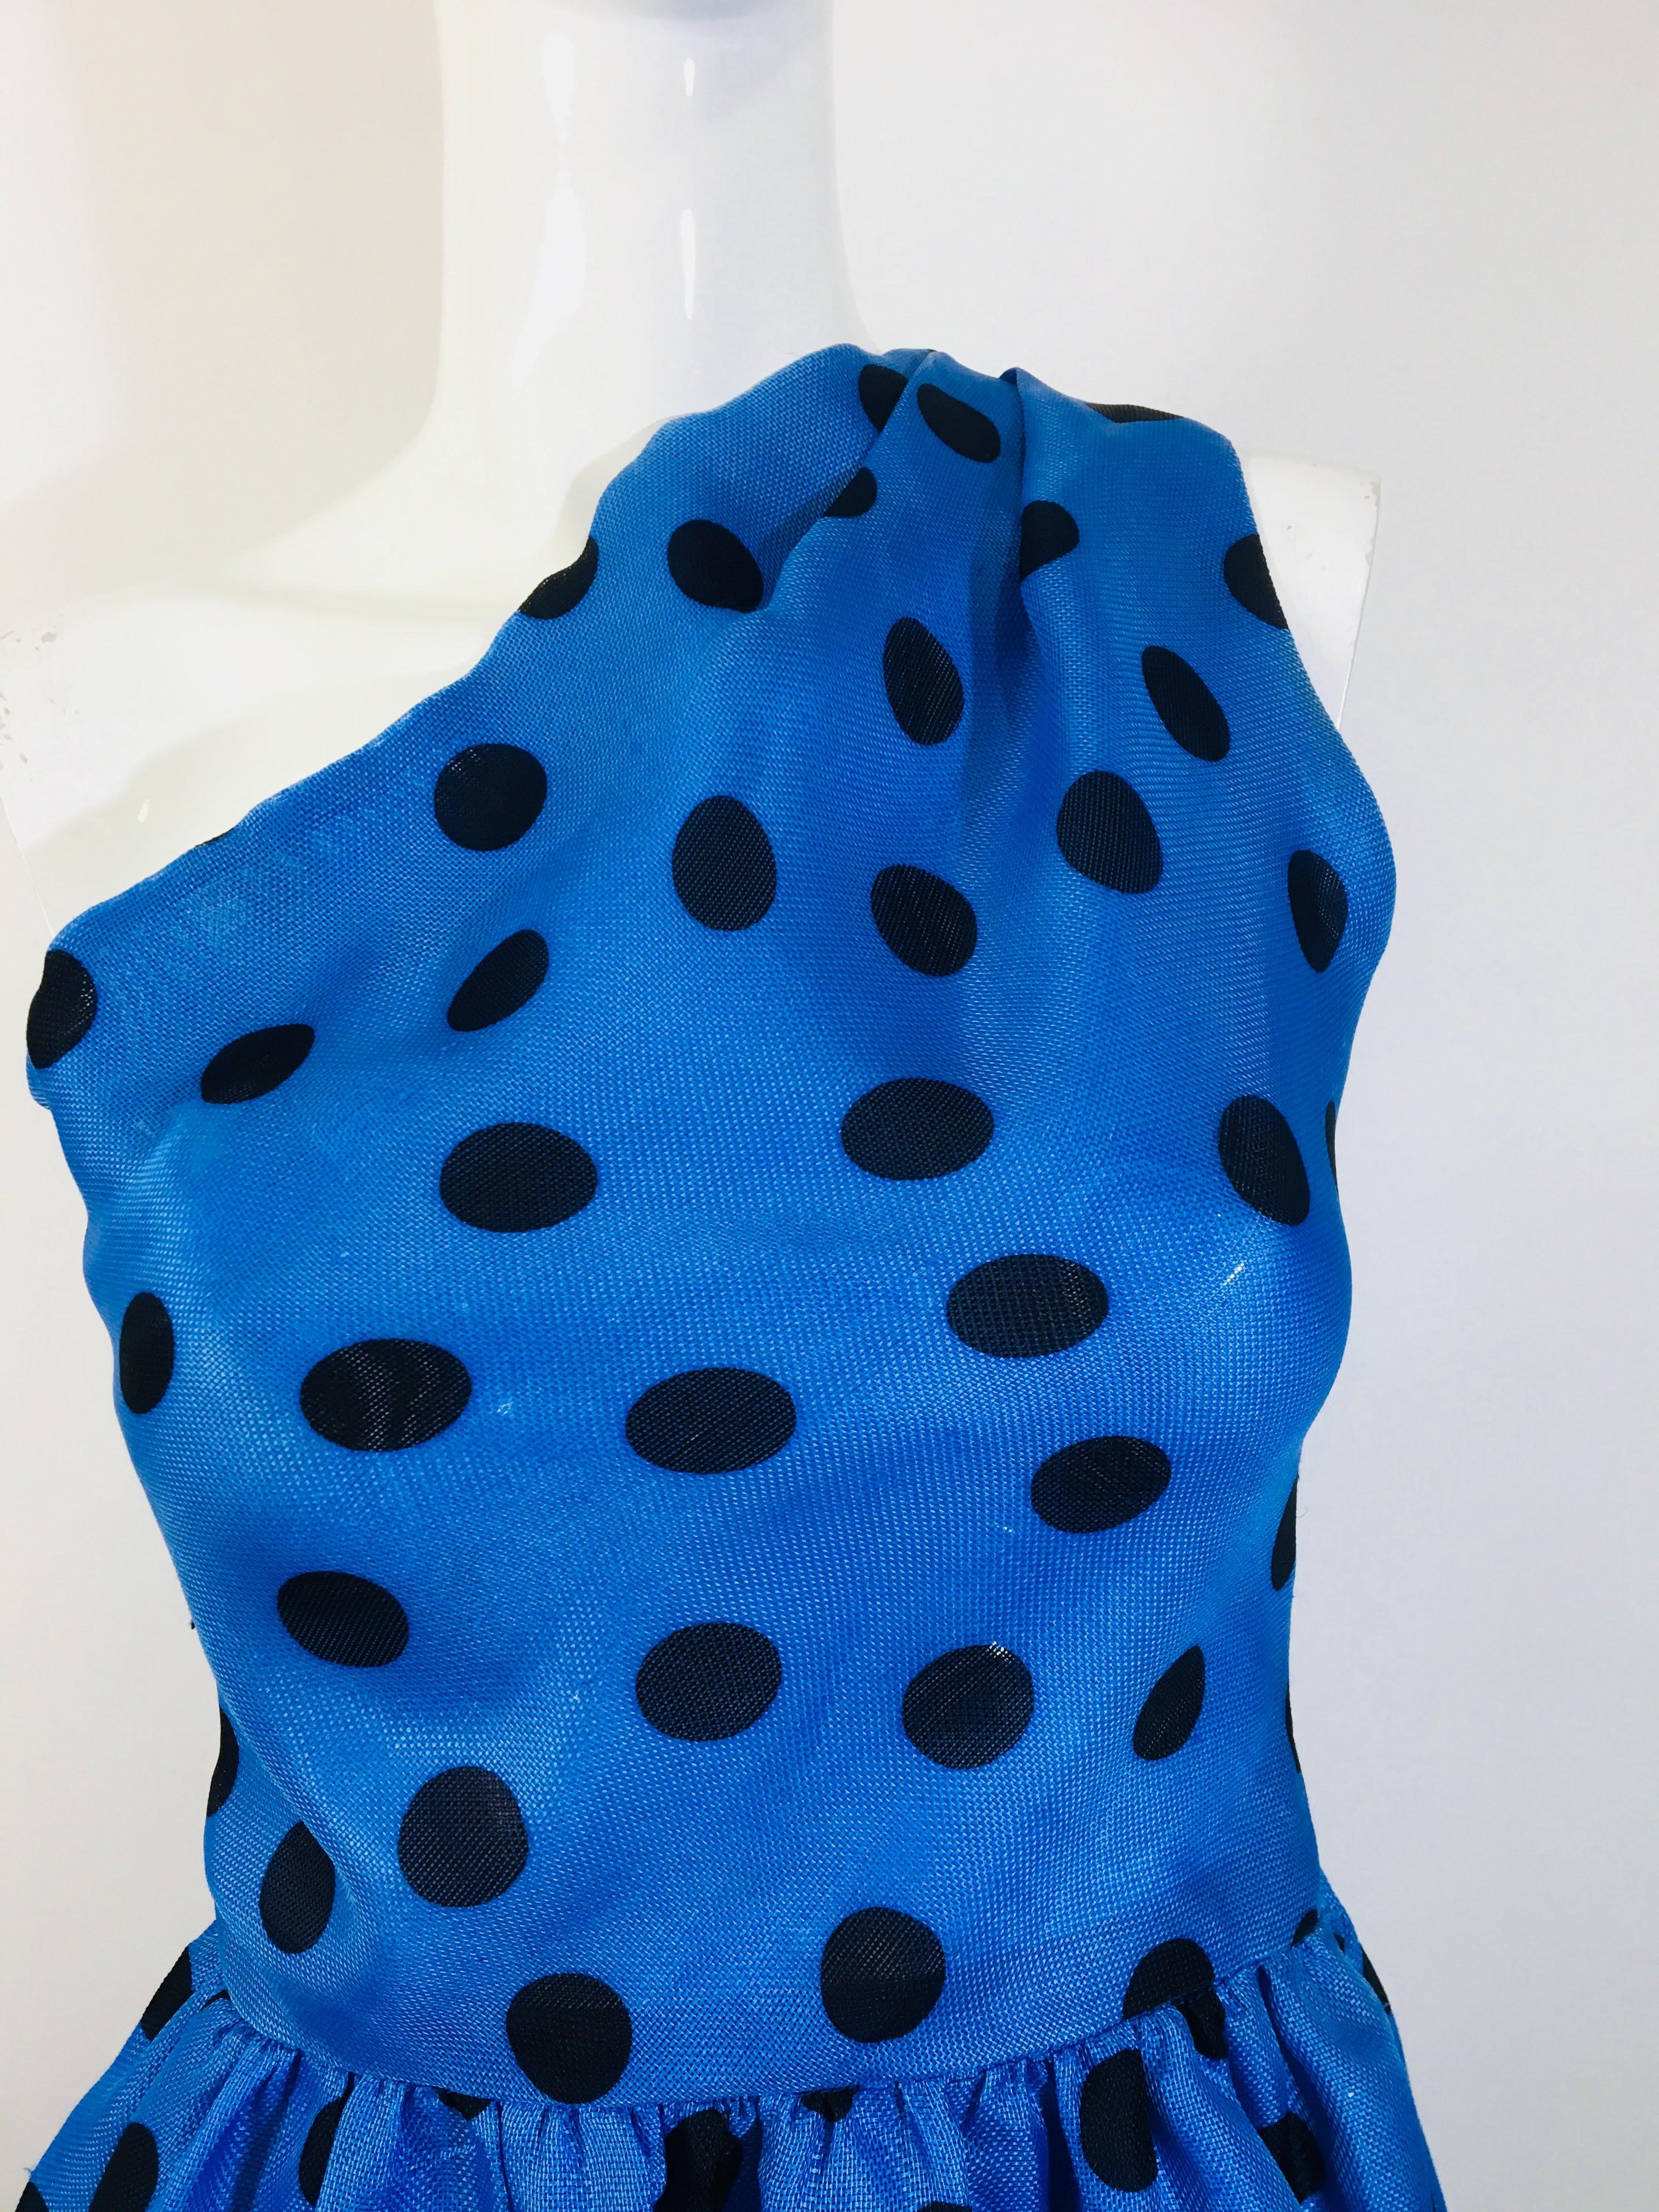 Givenchy Couture Blue and Black Polka Dotted One Shoulder, Knee-Length Dress.
97% Wool
3% Nylon 
Lining - 100% Acetato
Size 38 - Made In France